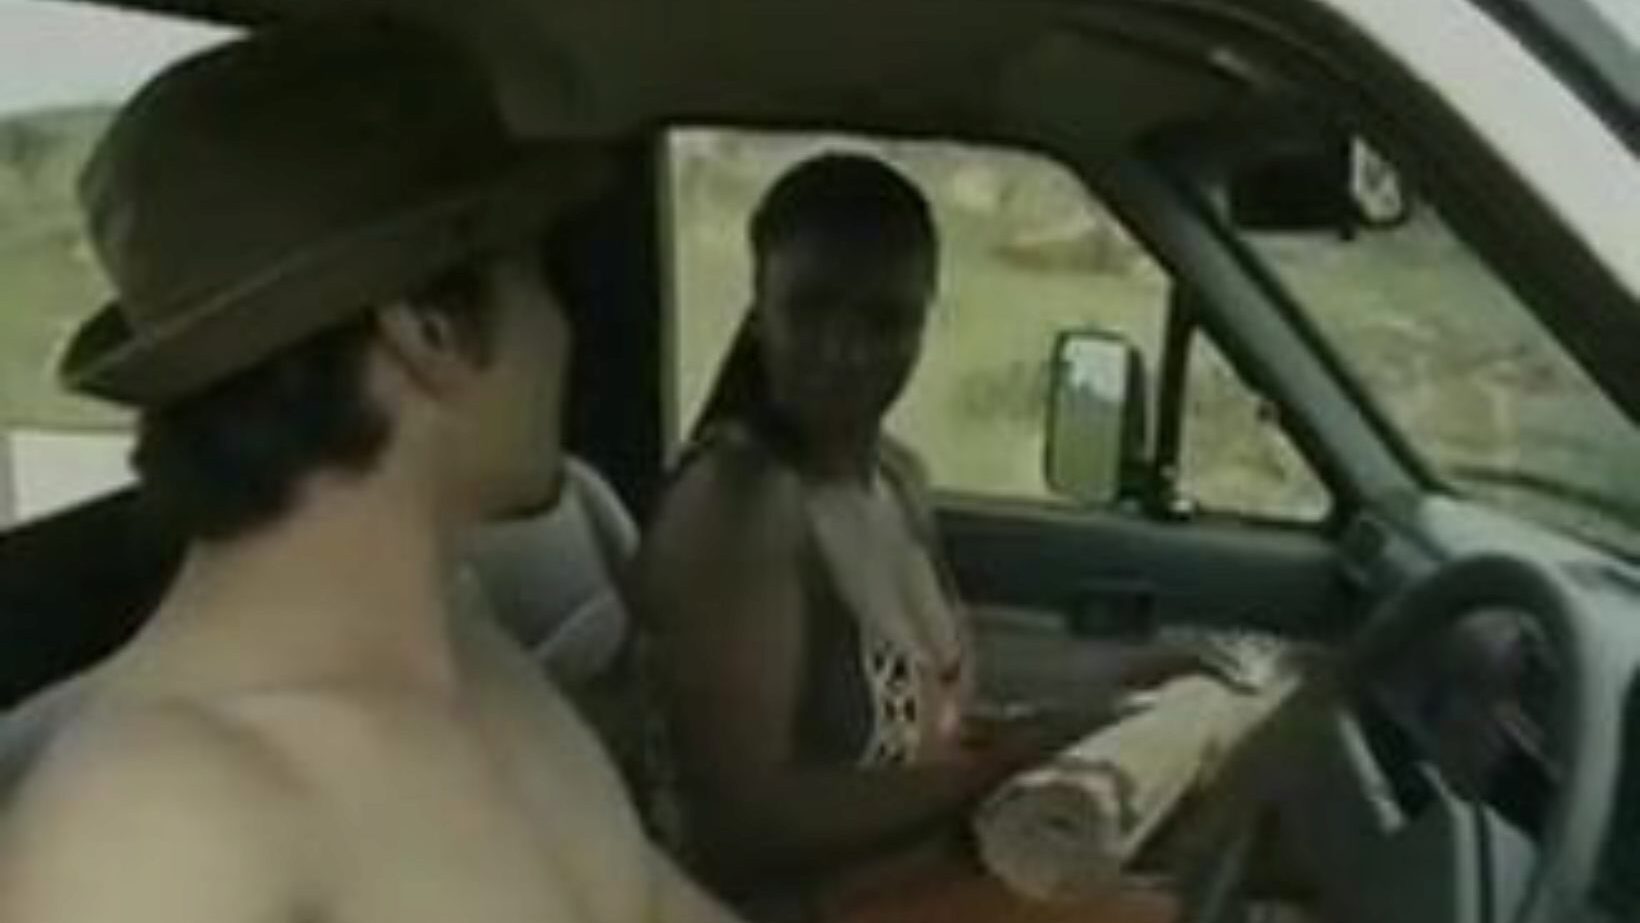 Ebony smash safari for white gay During The Time That driving on the savannah, this white fellow comes via a native Ebony angel This Chab does what I would do and fucks her in the back of his pickup and spermifies her nice-looking ebony love muffins